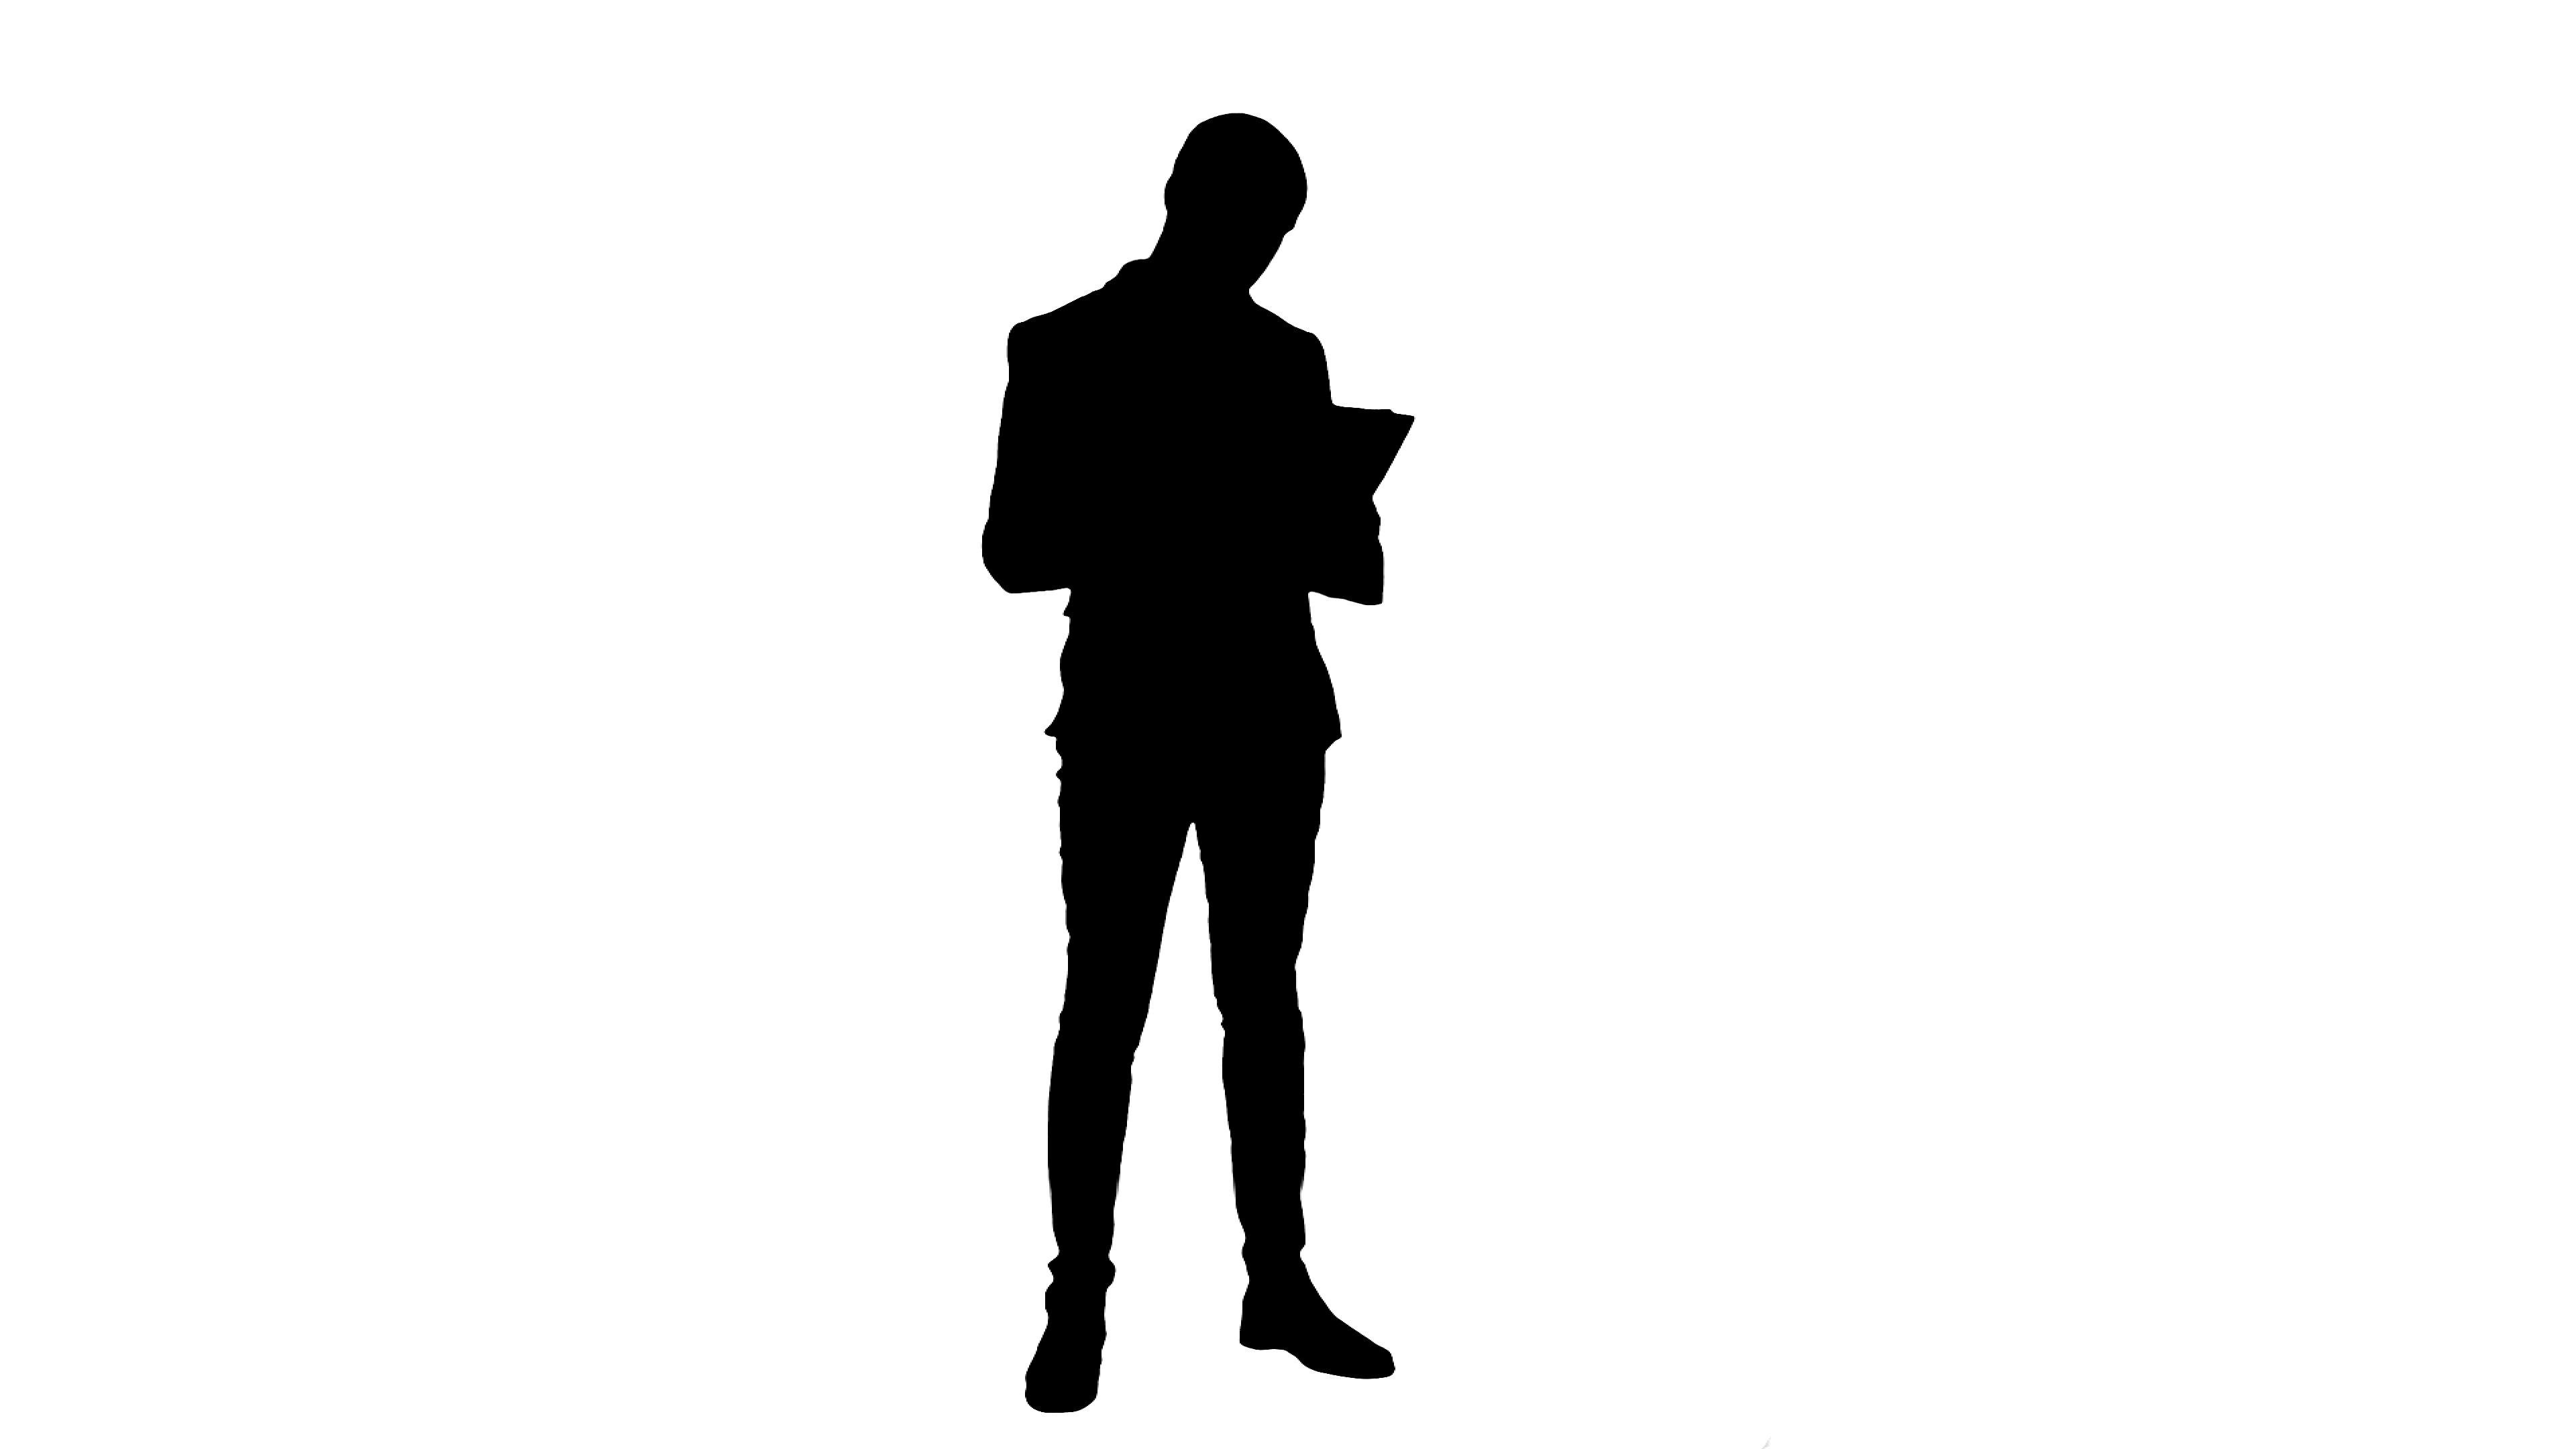 Manager silhouette getdrawingscom.